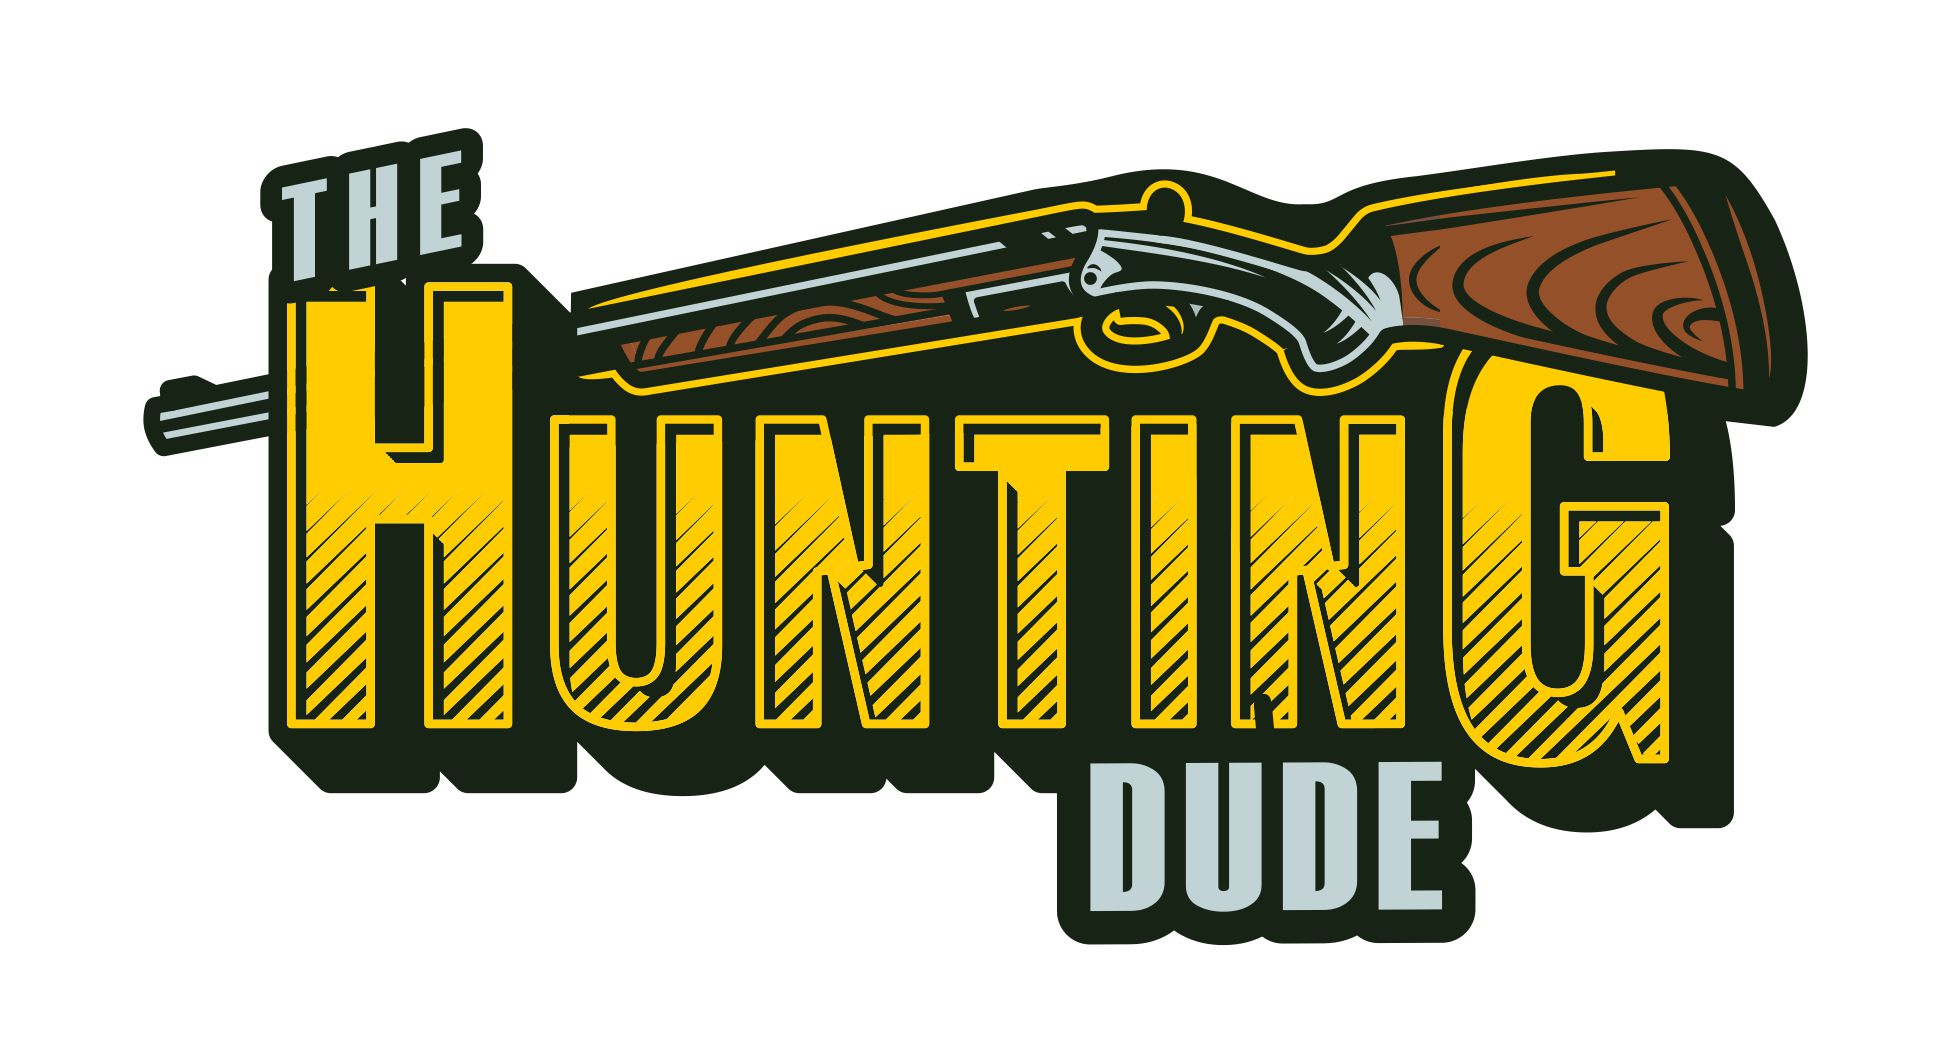 THE HUNTING DUDE